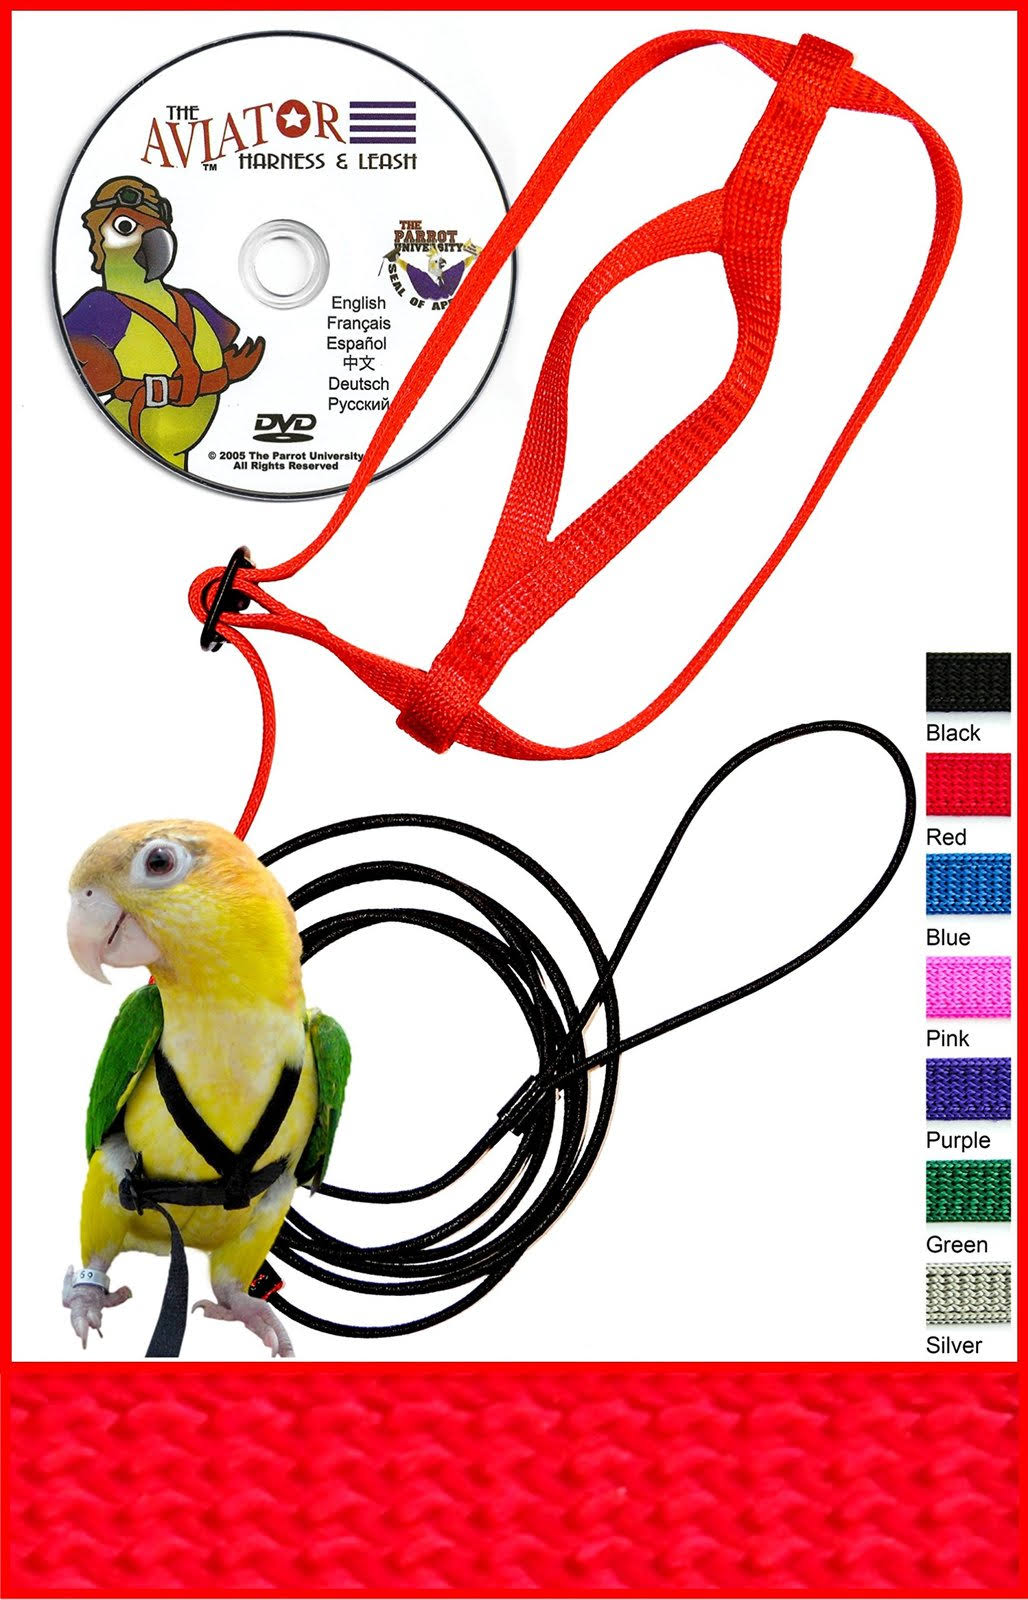 The Aviator Pet Bird Harness and Leash - Petite Red